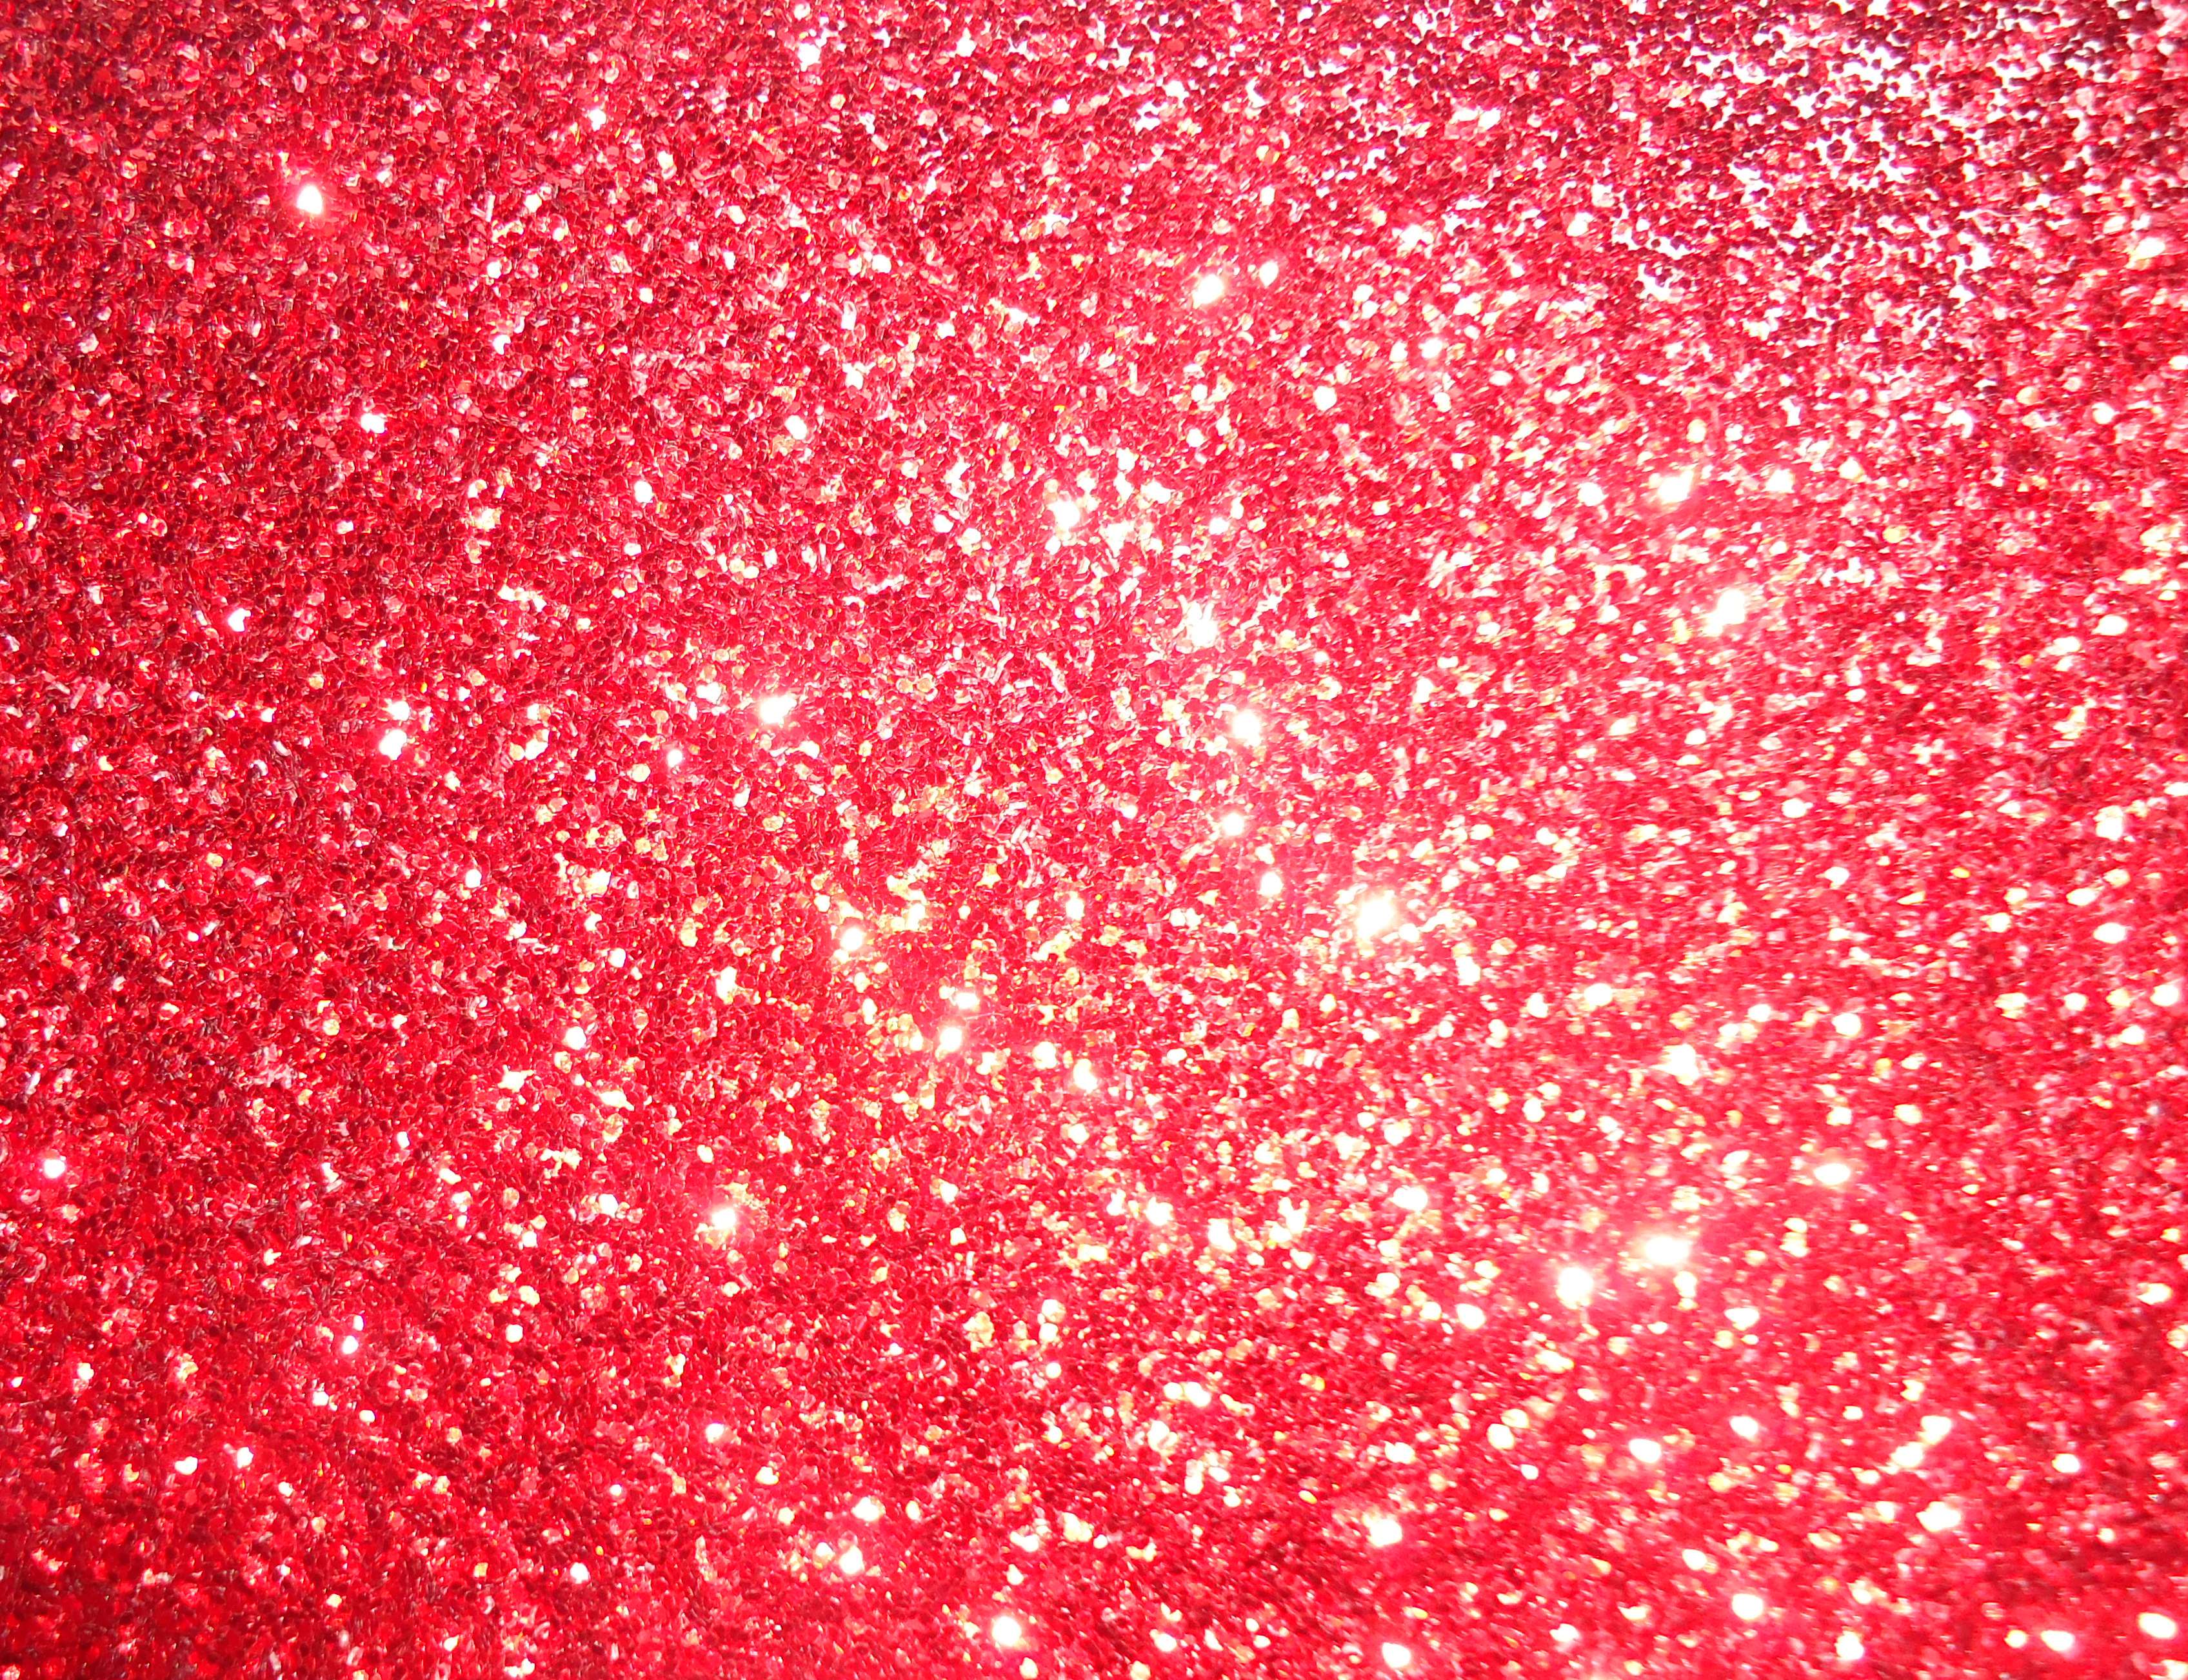 FREE Red Glitter Background in PSD